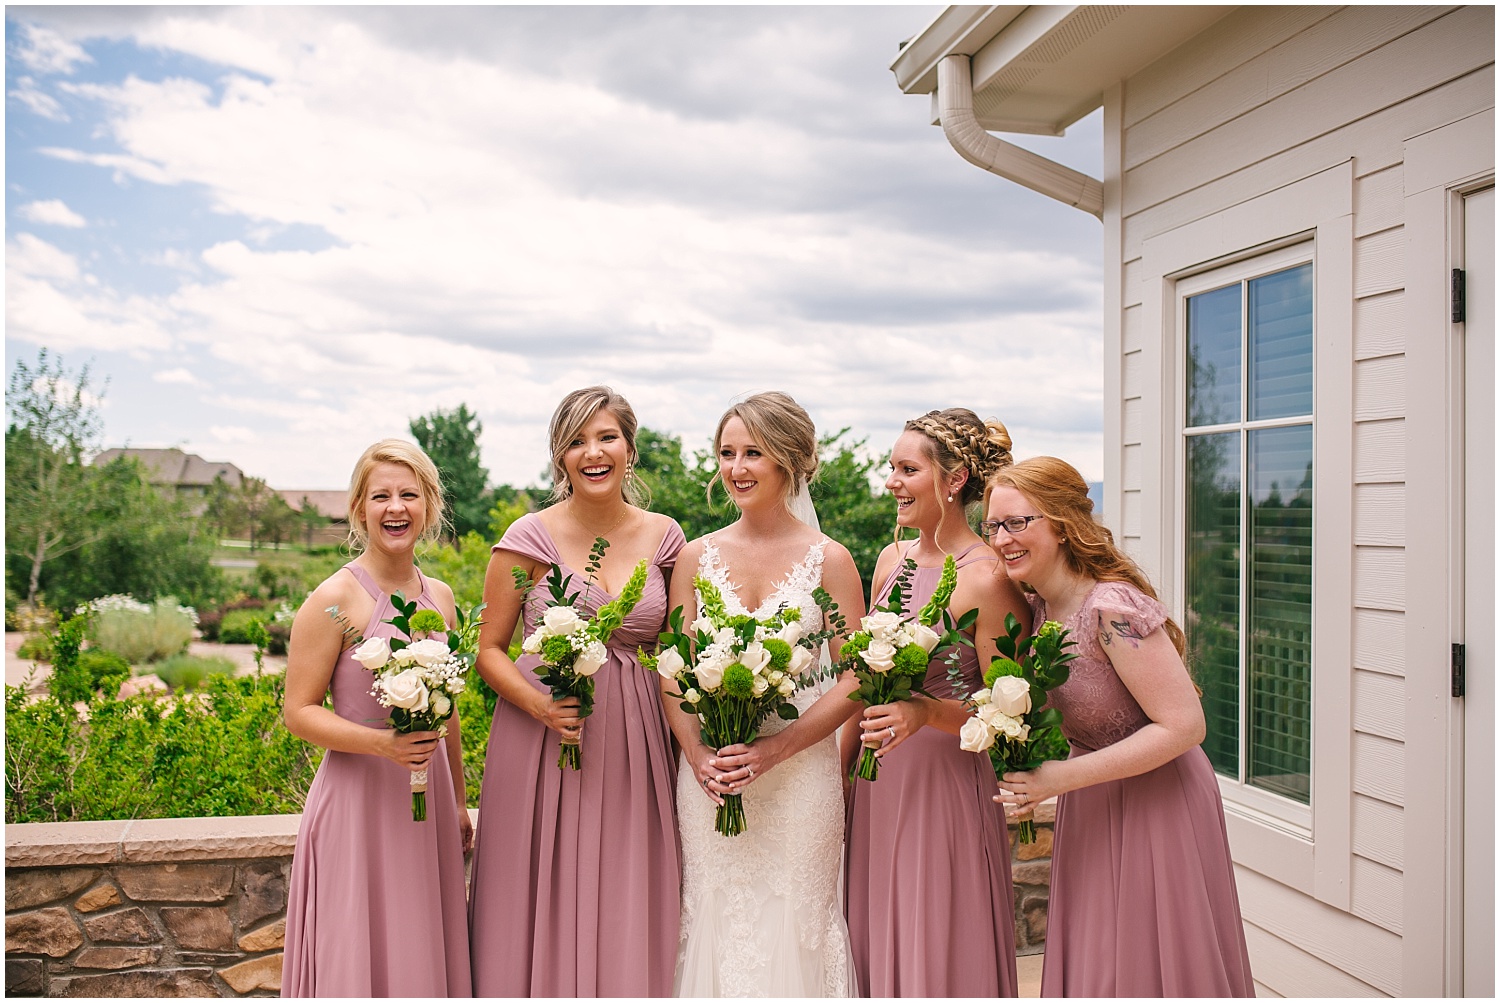 Bride with bridesmaids in floor-length pink dresses and white and green bouquets